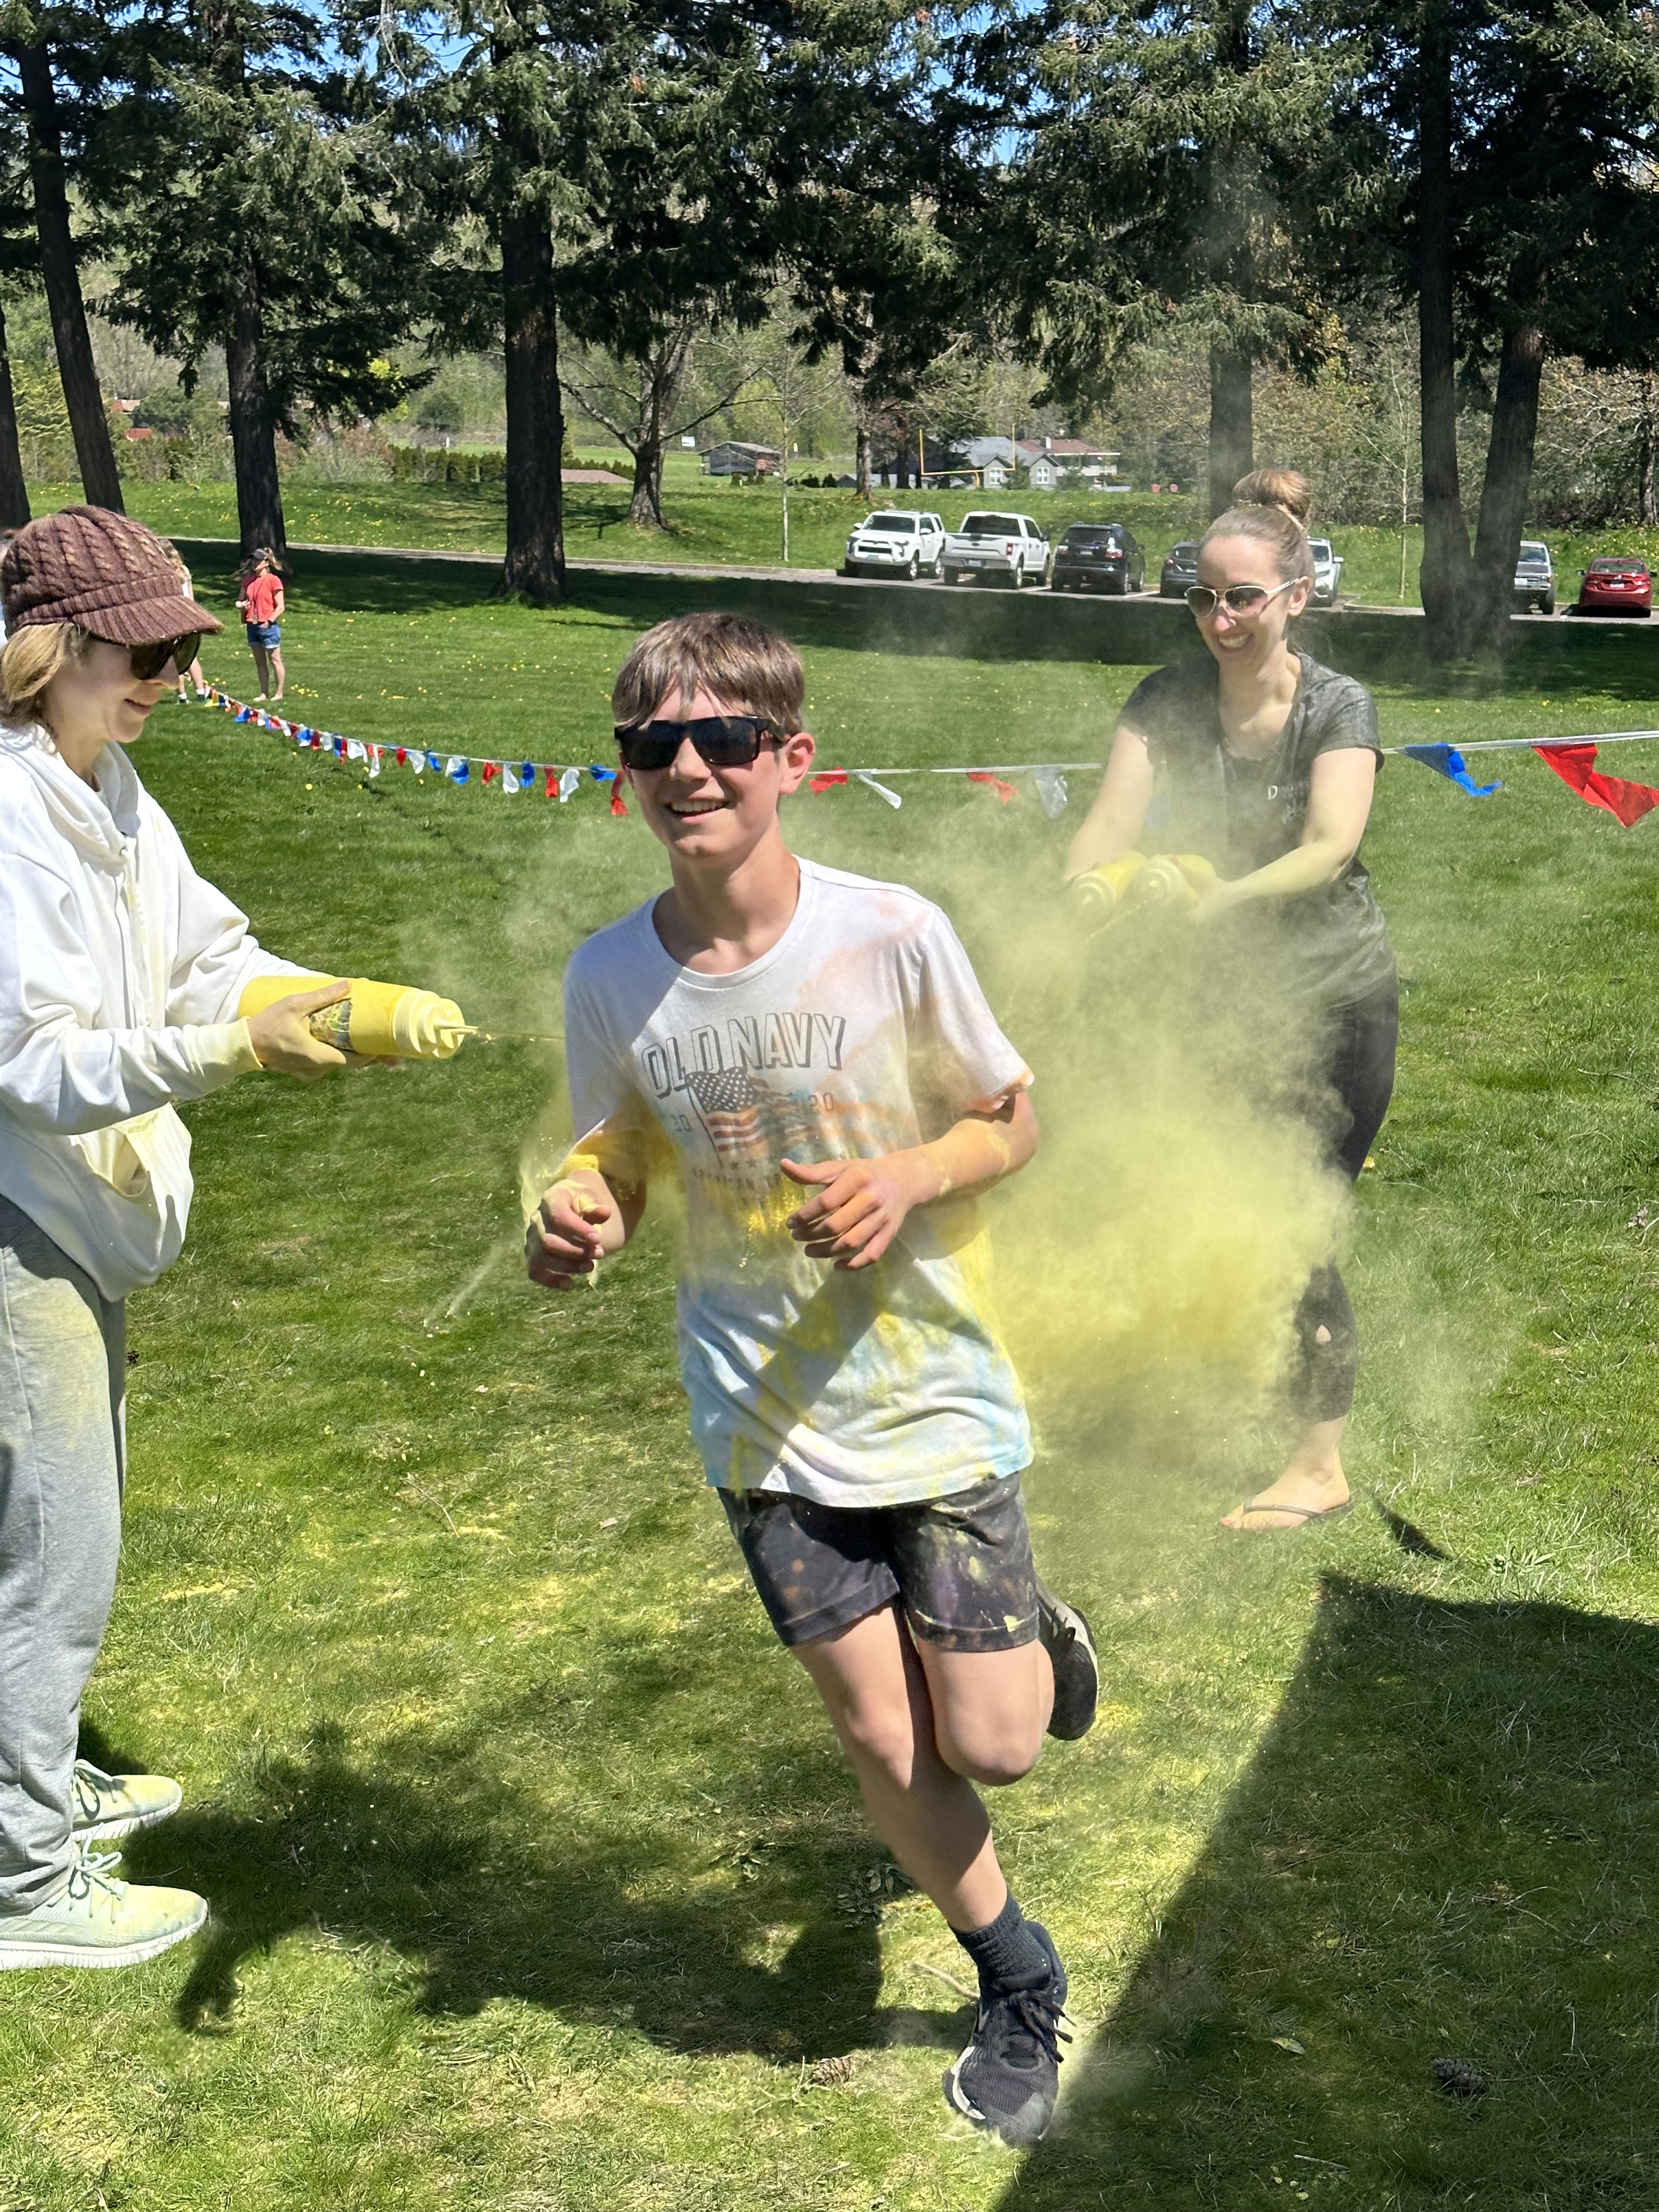 Student runs through two volunteers who spray them with yellow food safe dye